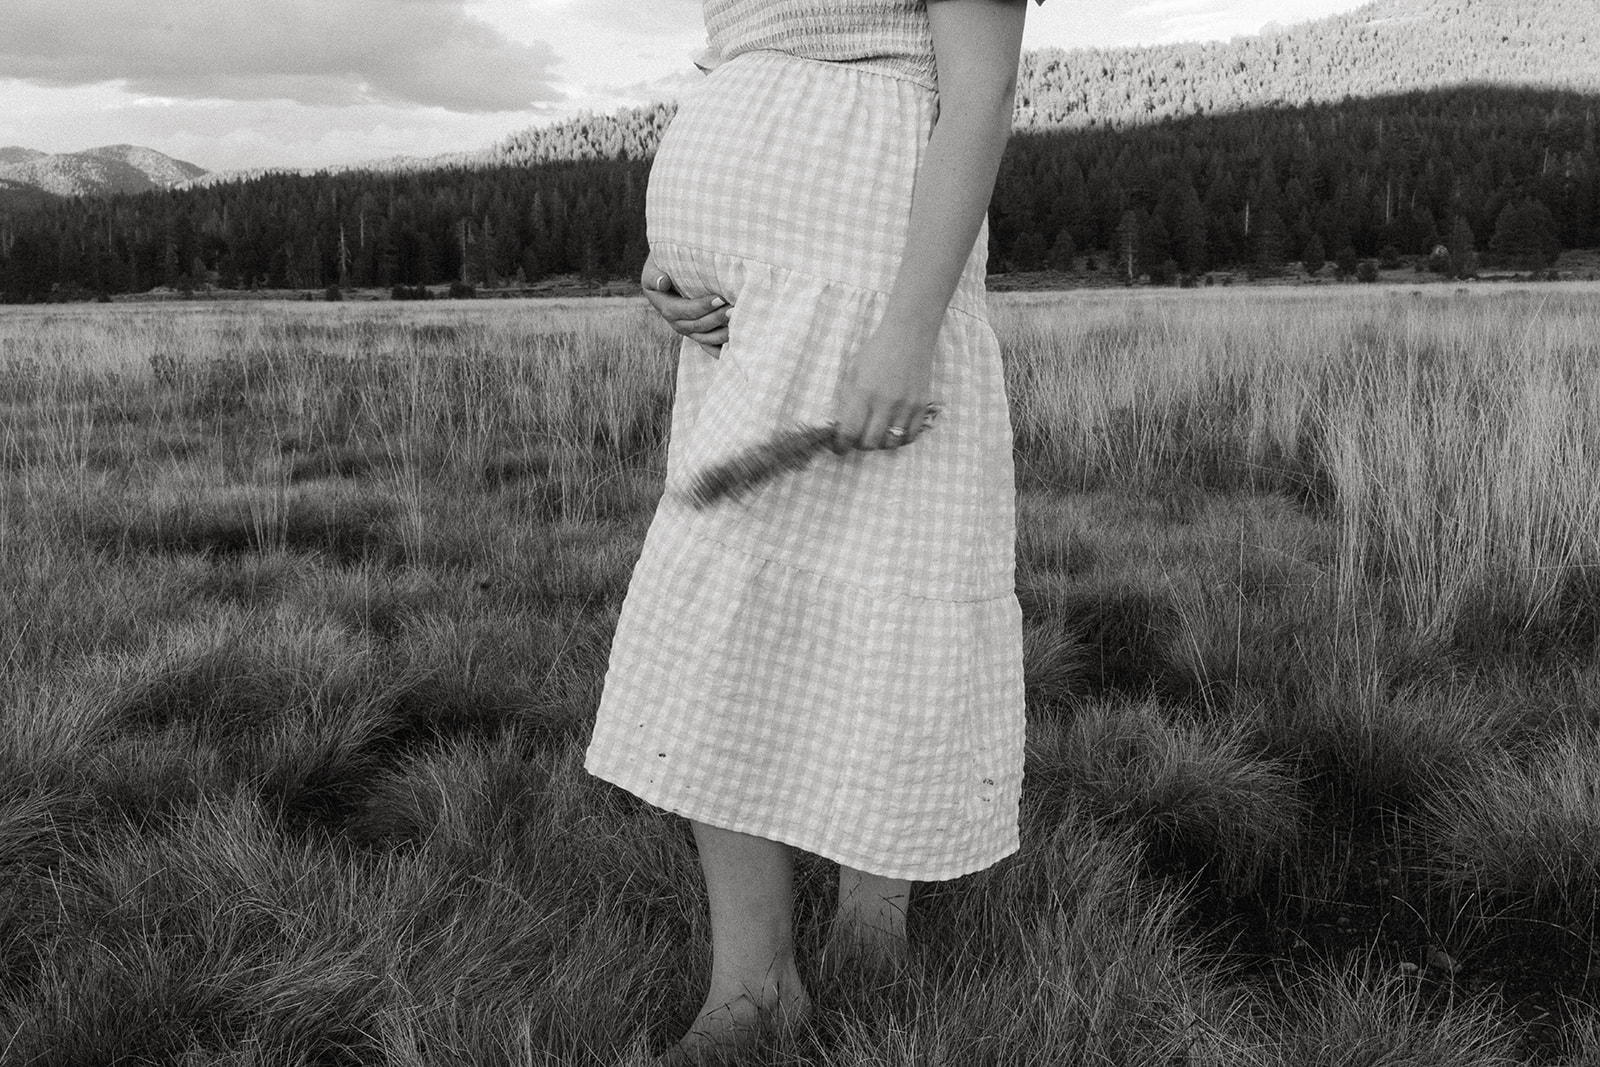 a mom holding flowers in a black and white whimsical artistic blurred maternity photos taken in hope valley california.